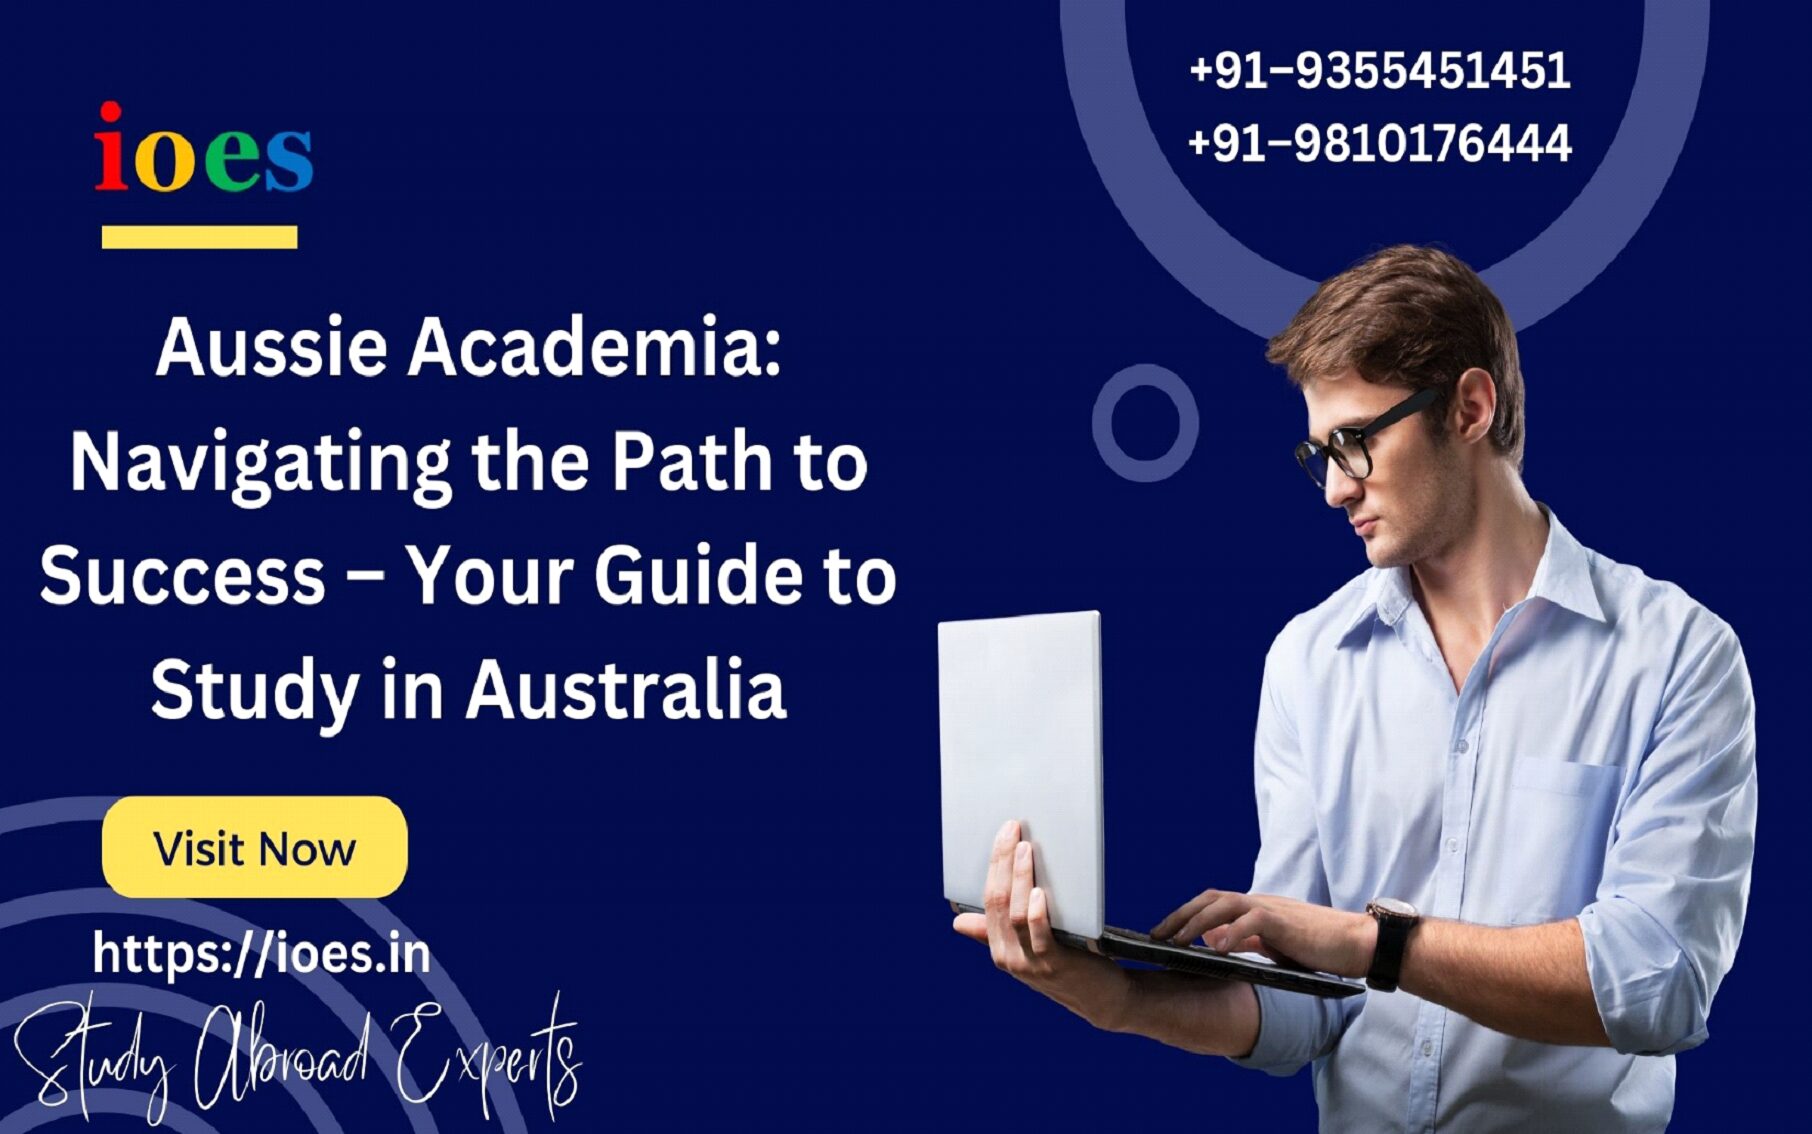 Aussie Academia: Navigating the Path to Success – Your Guide to Study in Australia